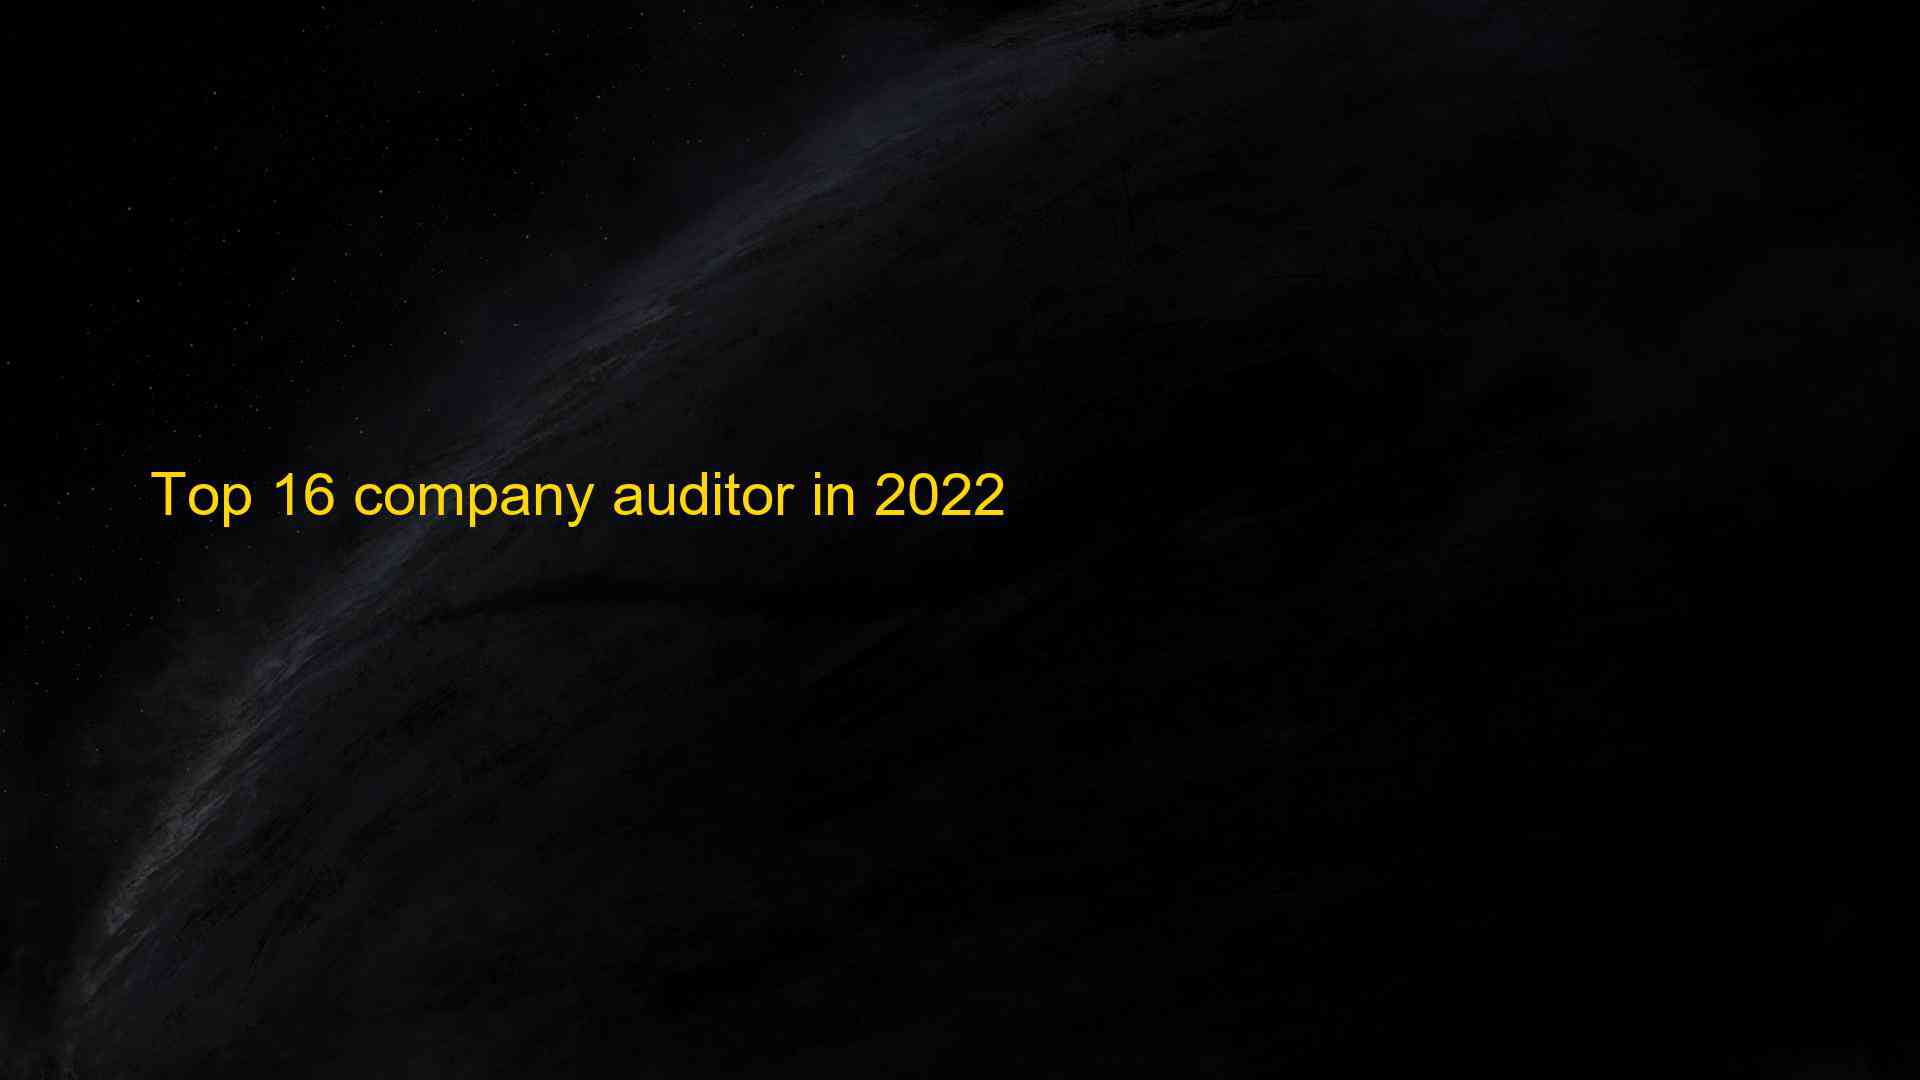 Top 16 company auditor in 2022 1660013108